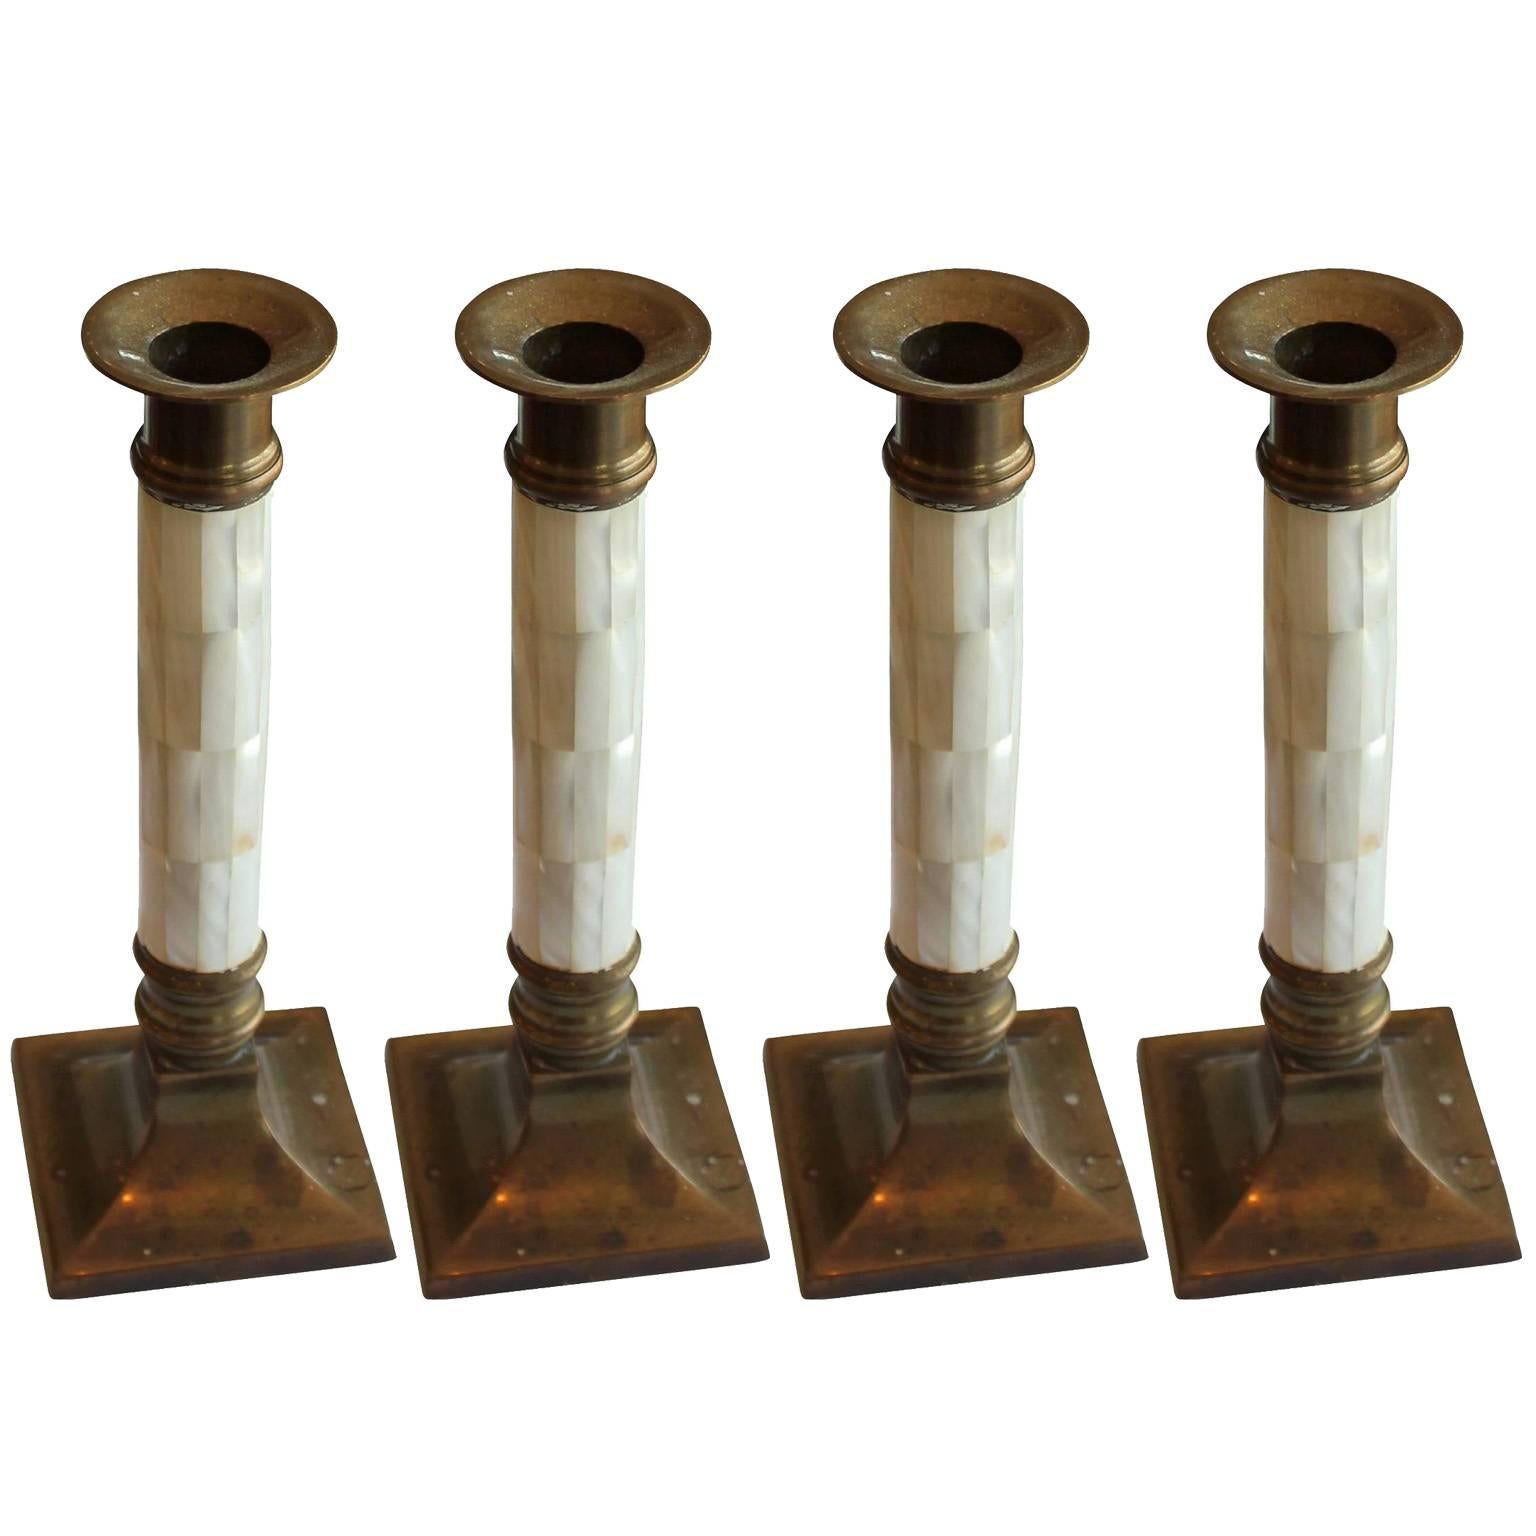 Lovely set of four vintage candlesticks. Constructed of brass and mother of pearl. Brass has a nice patina.